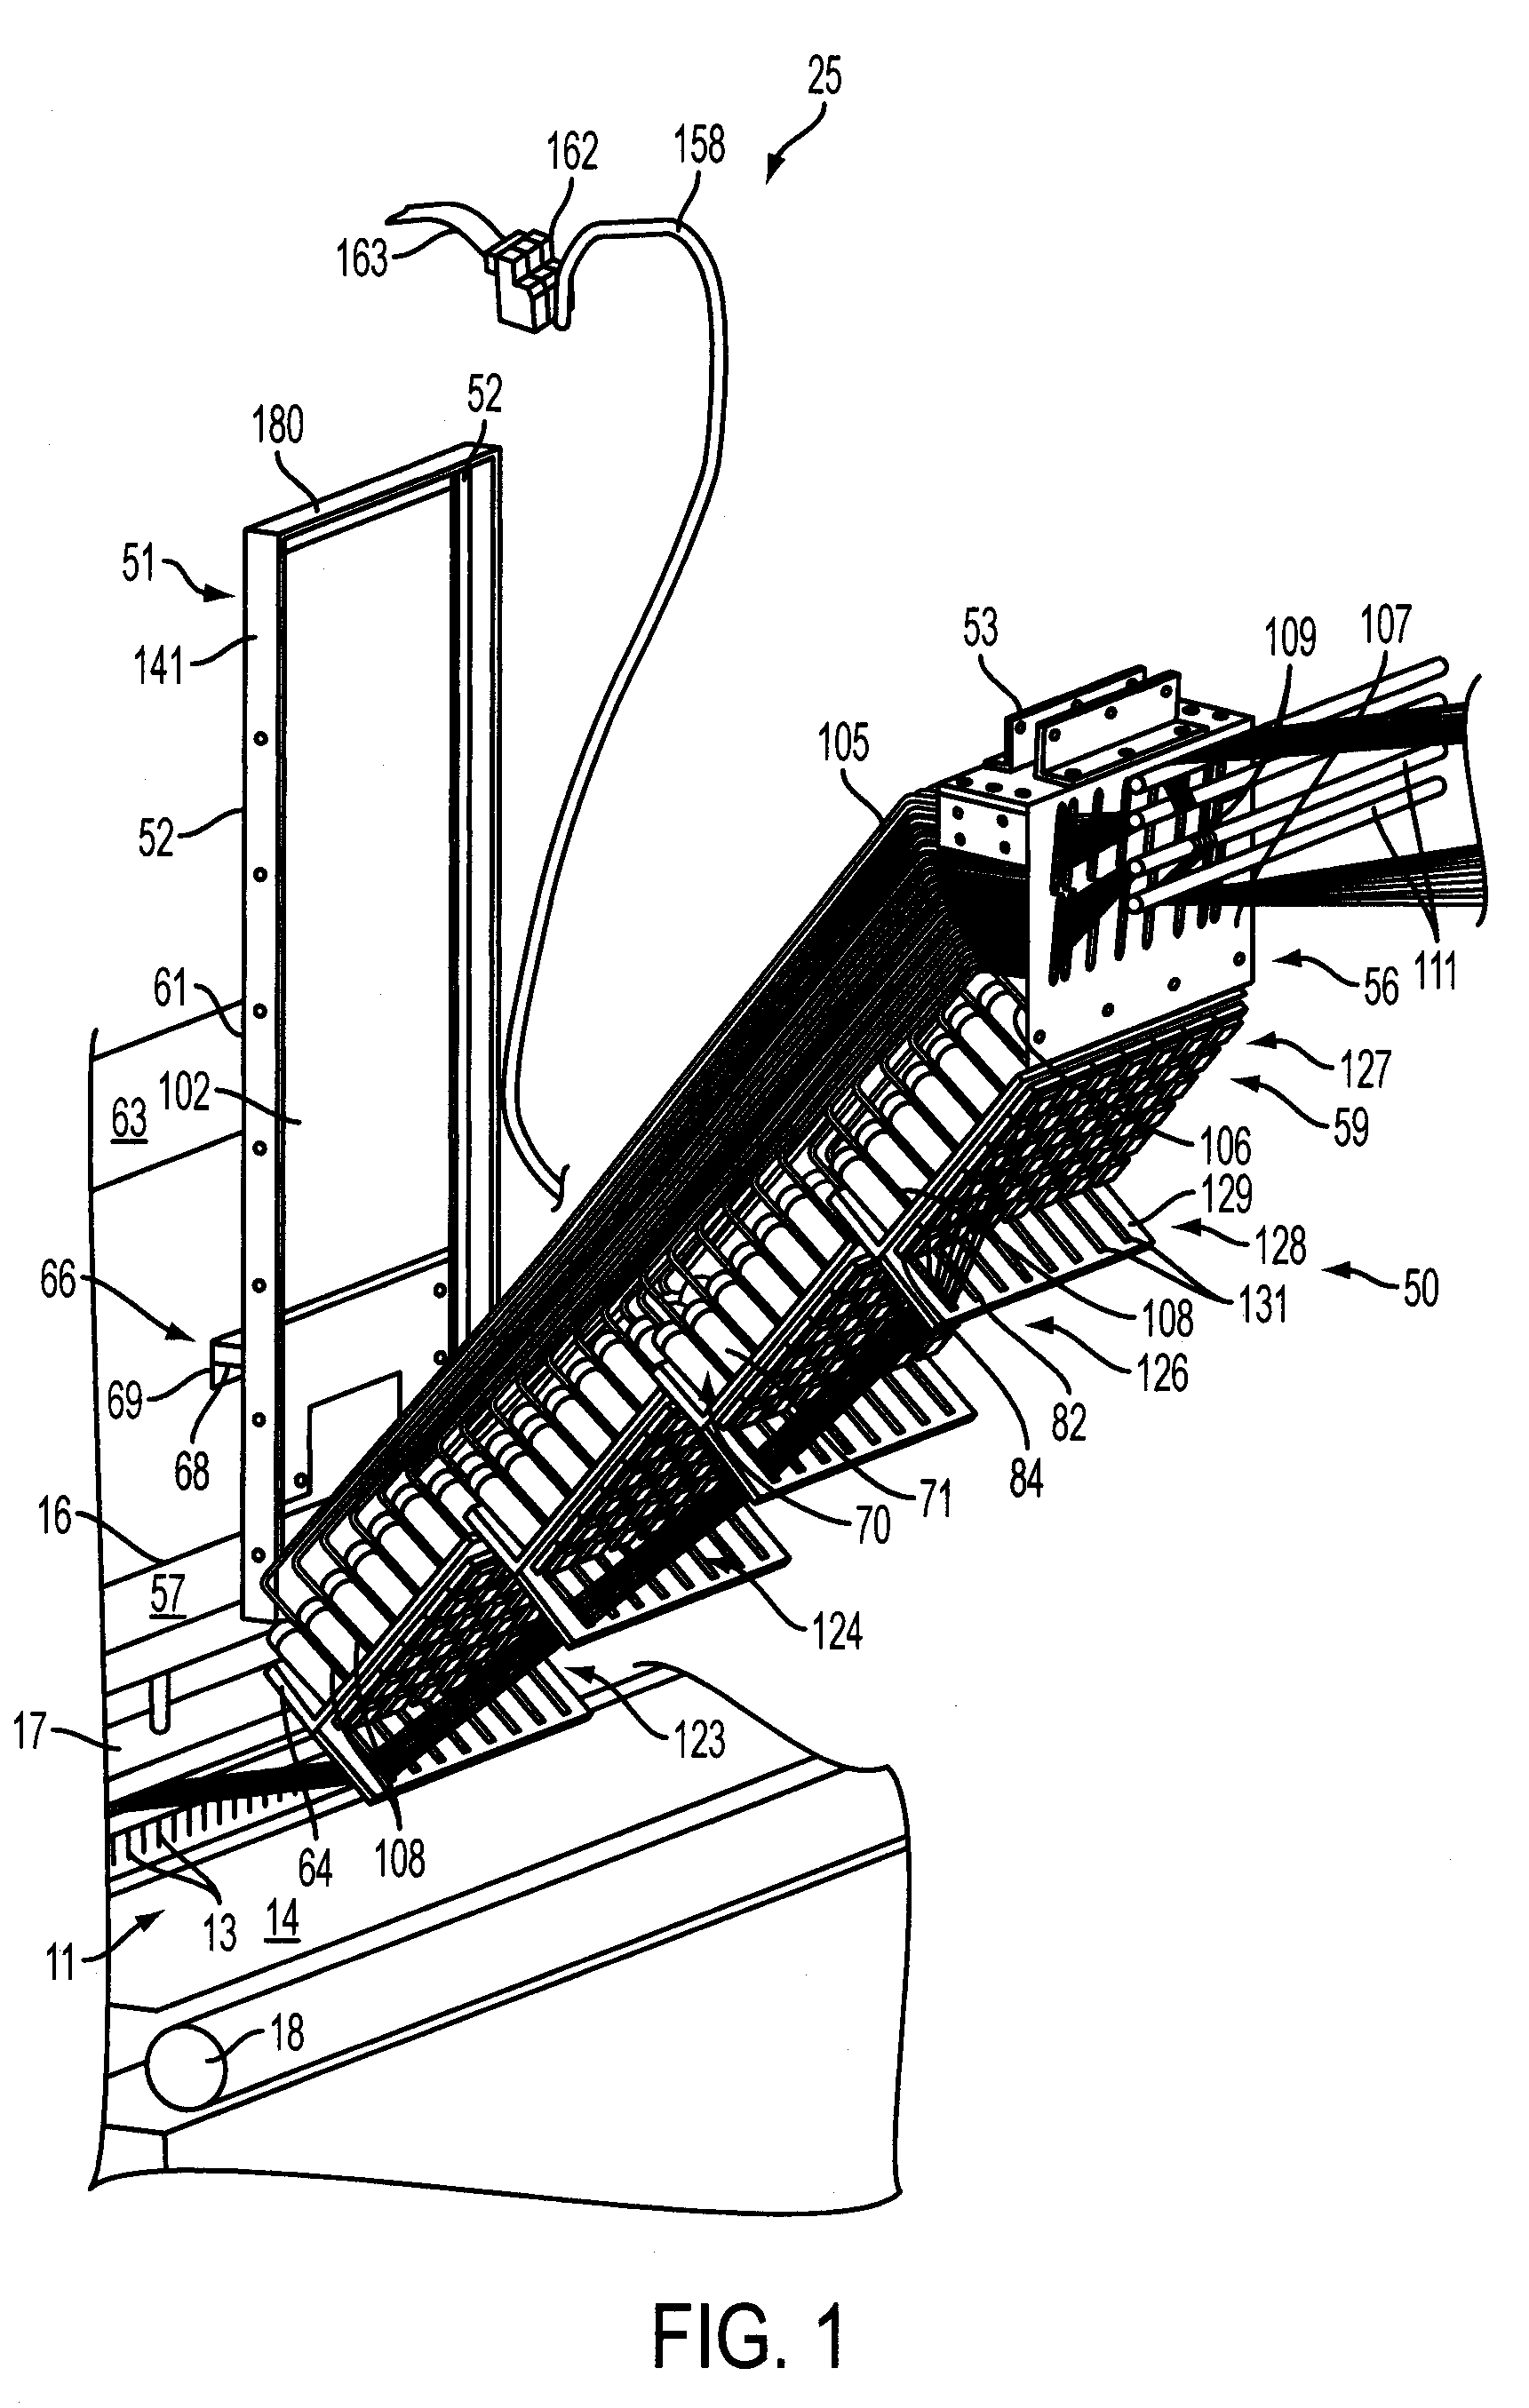 Integrated motor drive system for motor driven yarn feed attachments